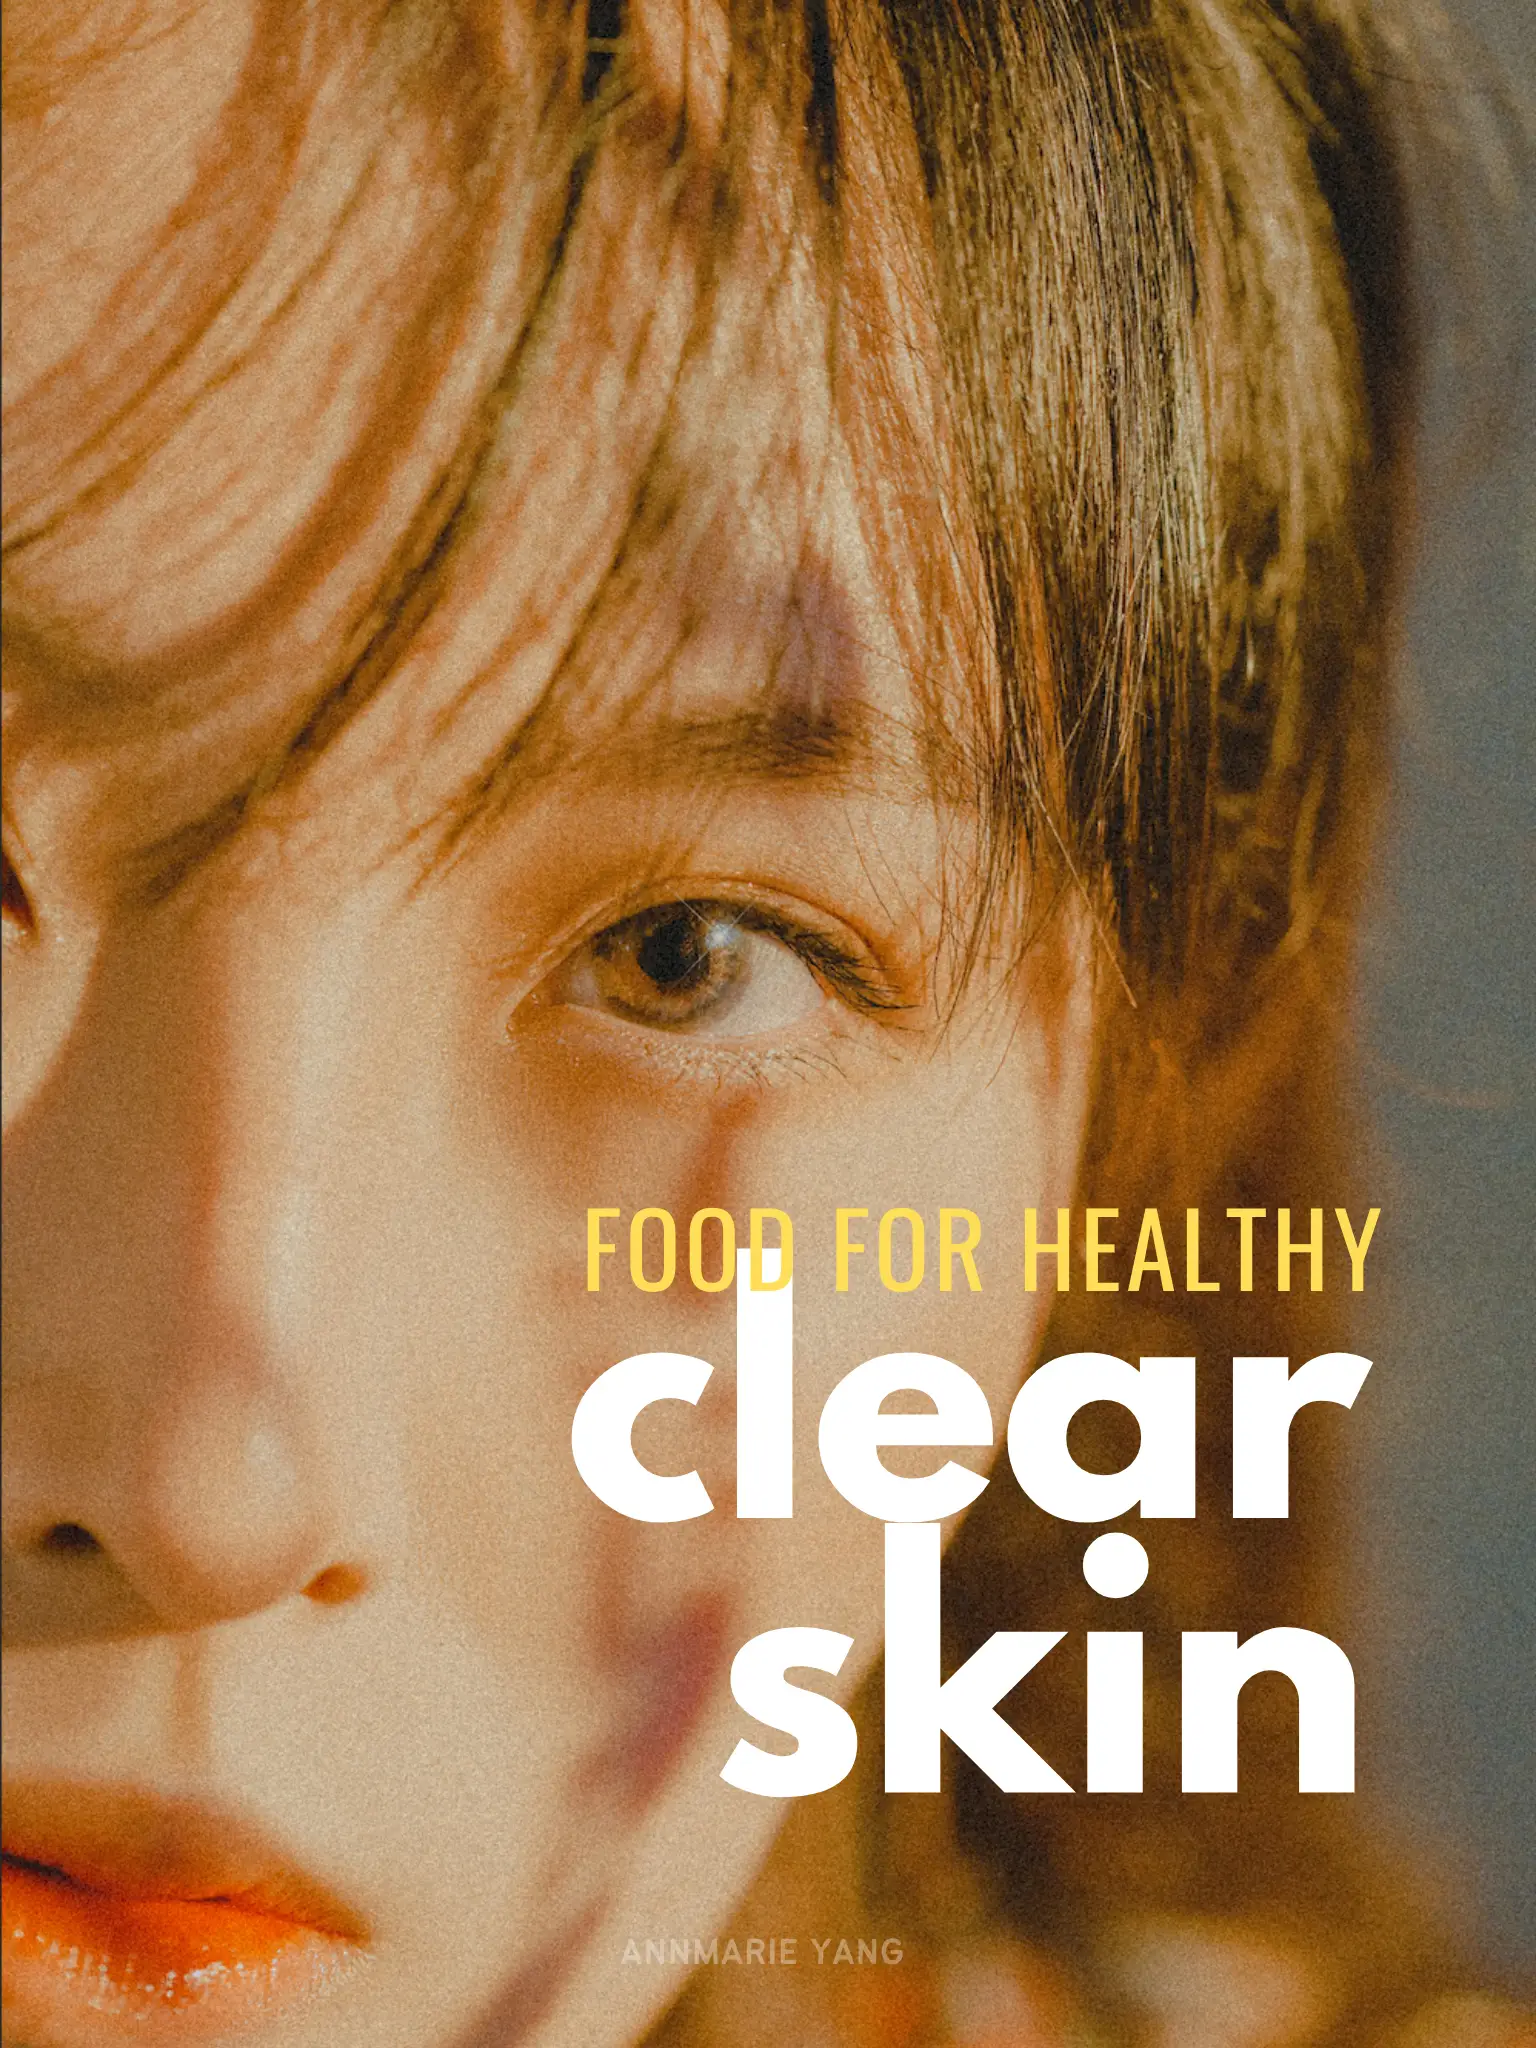 ⚠️eat these food for CLEAR BEAUTIFUL SKIN⚠️'s images